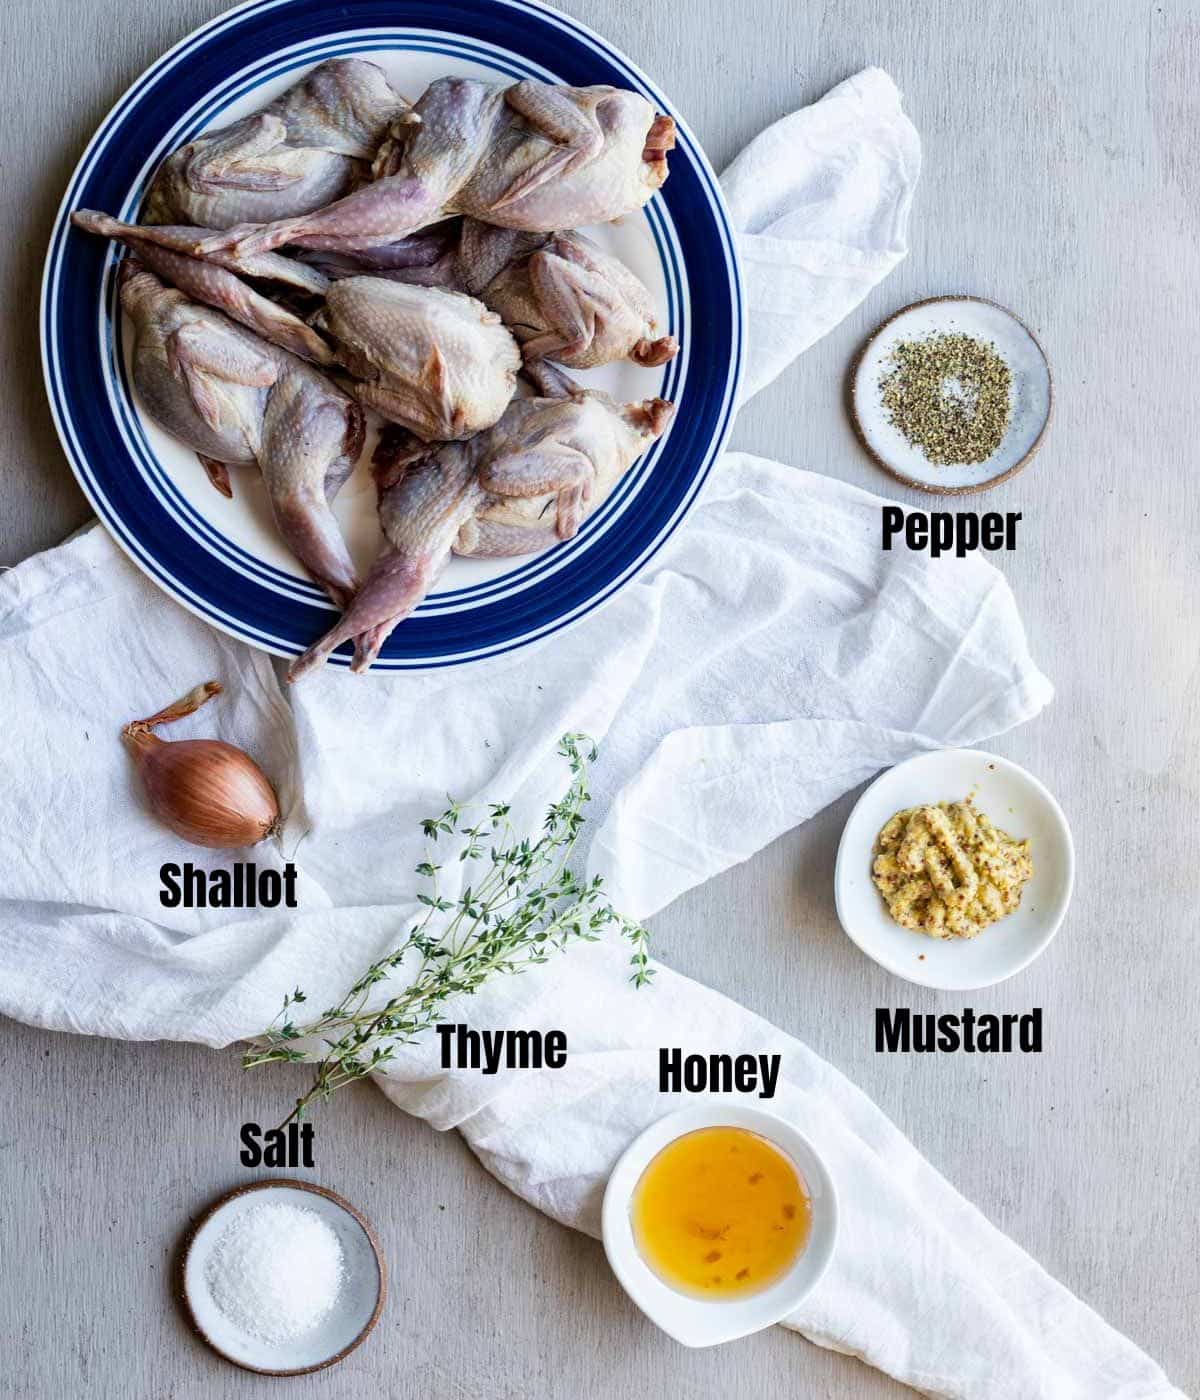 Ingredients to make sous vide quail arranged individually and labelled.